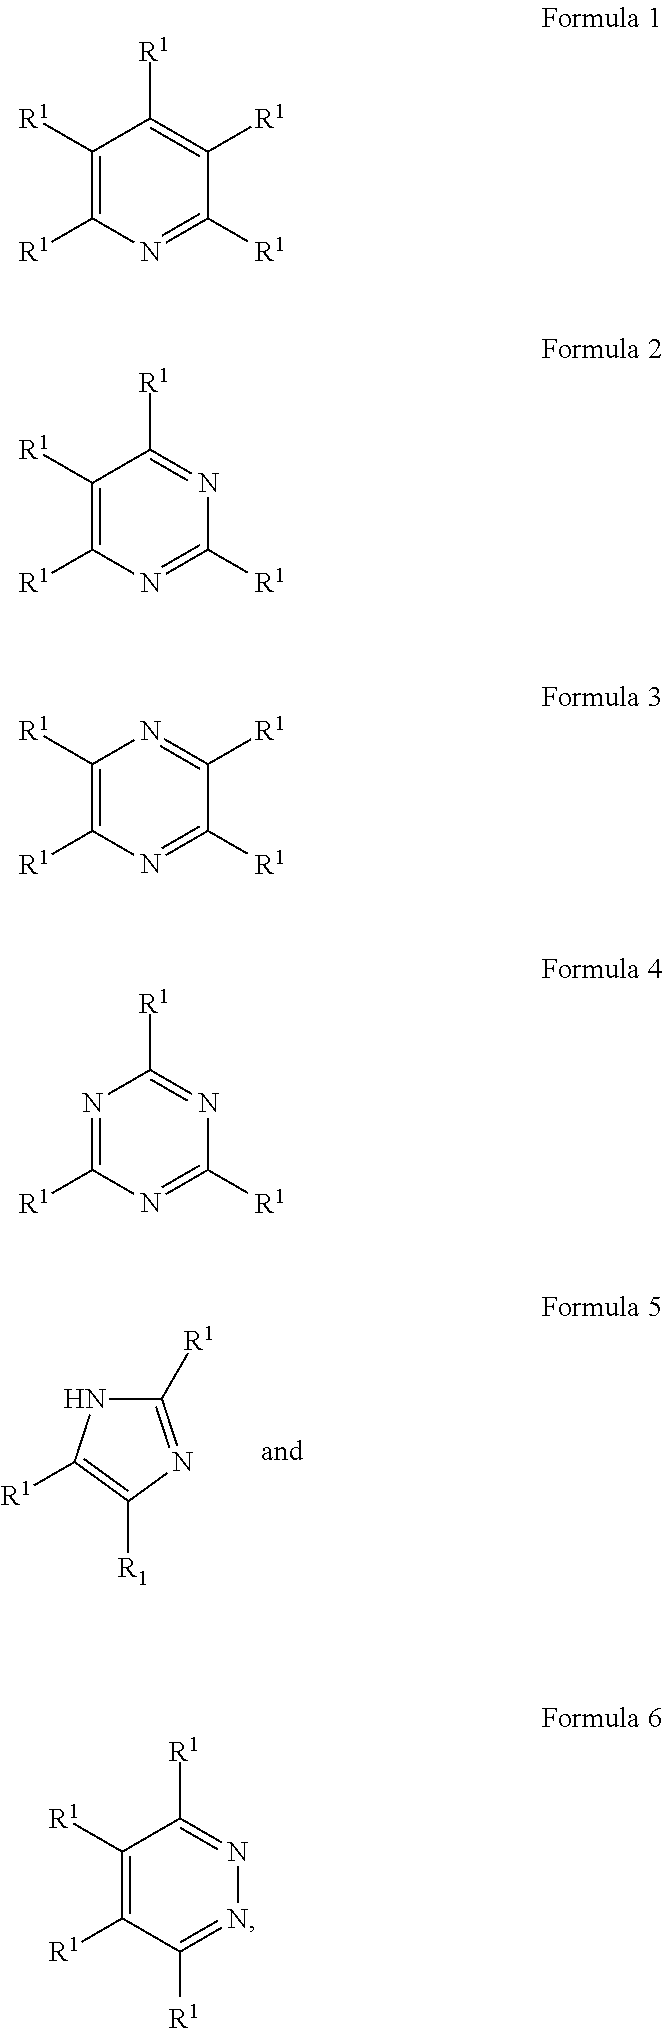 Branched Aliphatic-Aromatic Polyester Blends